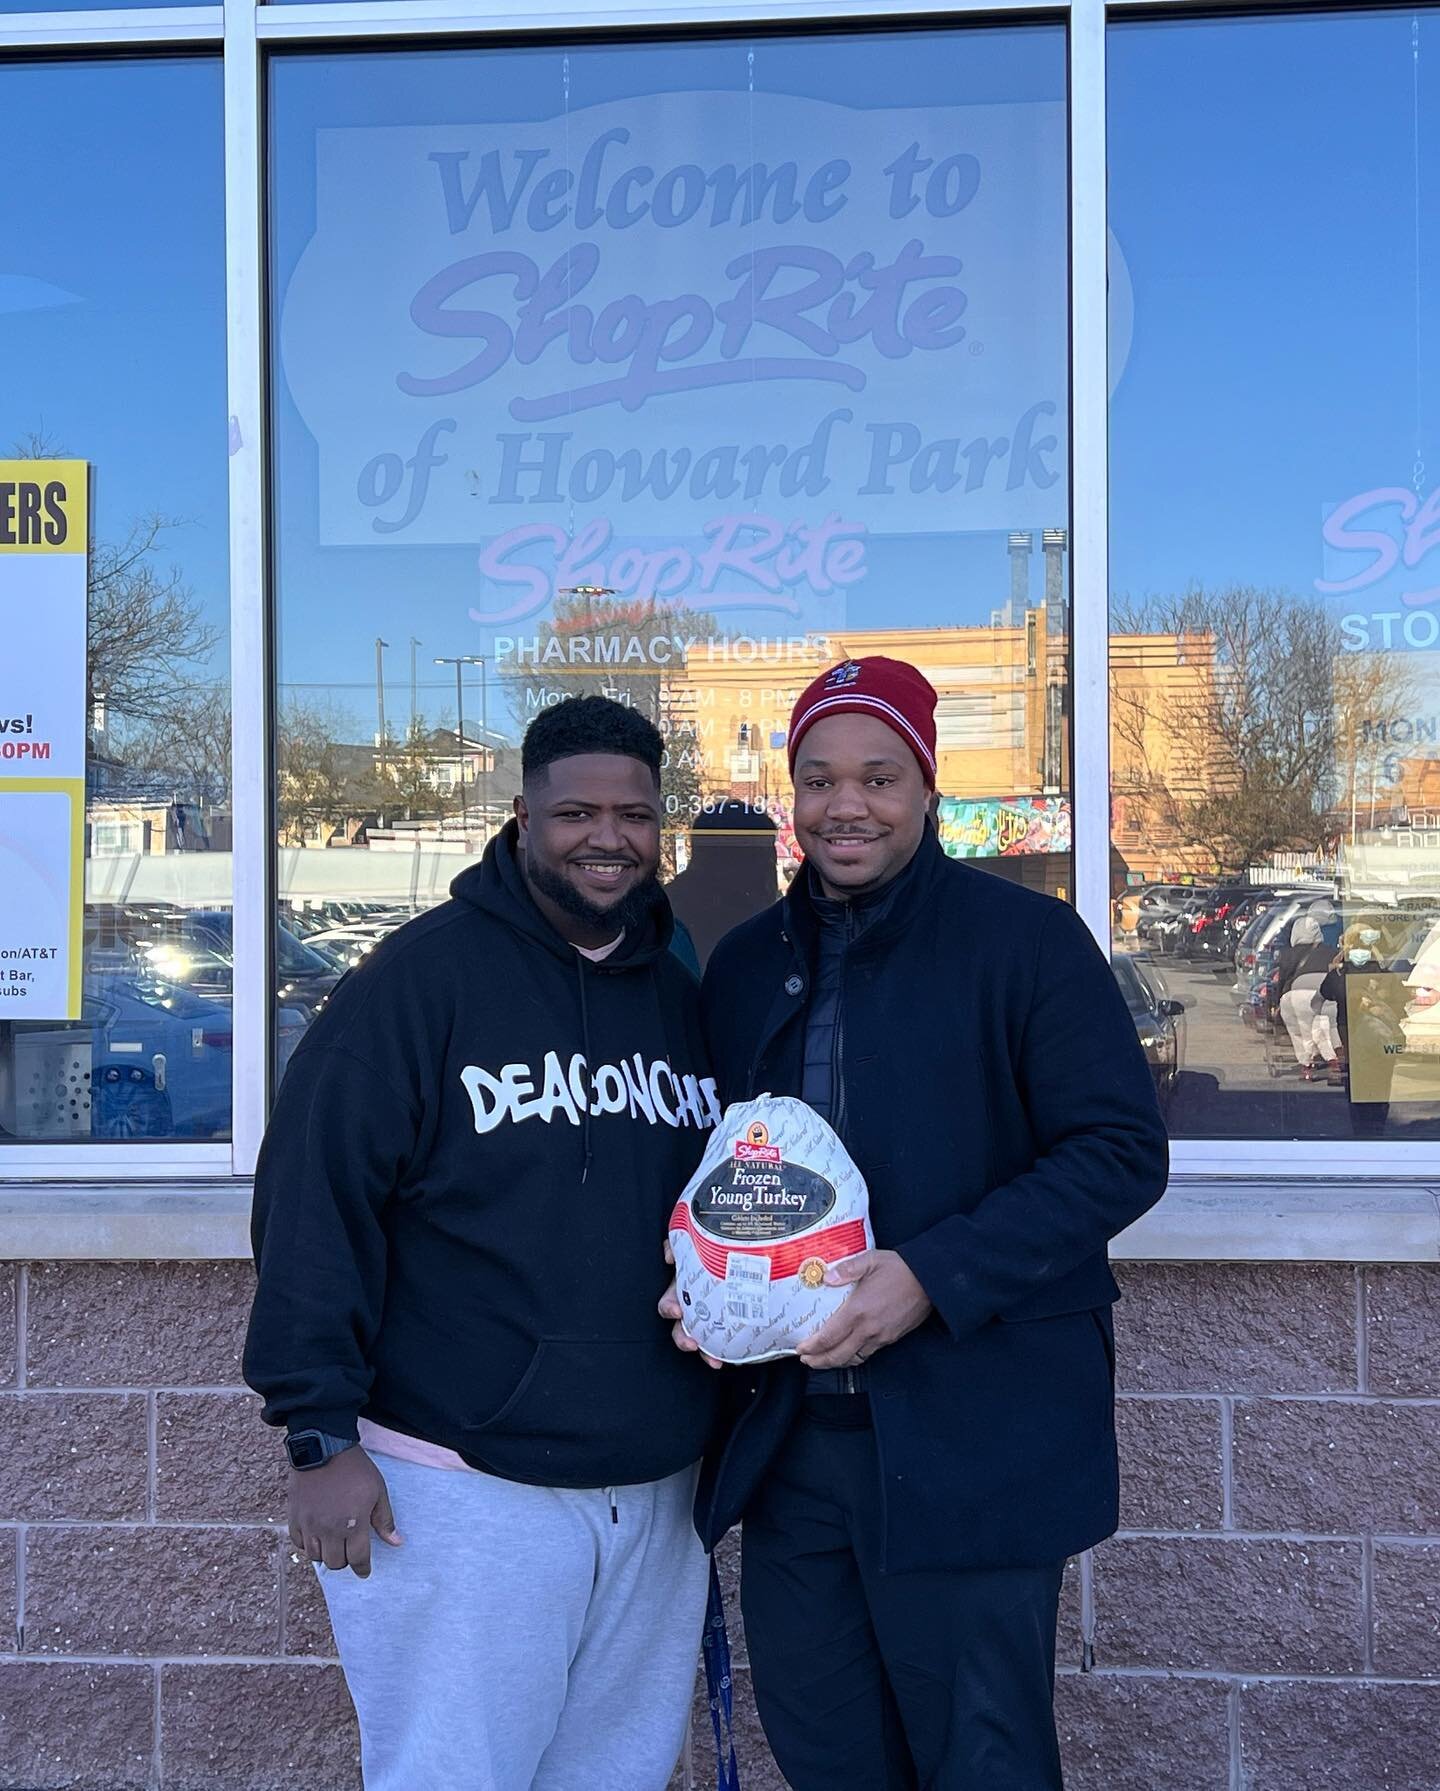 Teamed up with @shopritestores and @chef_scipio to provide 30 families with turkeys. Thankful for the opportunity to bless families with thanksgiving dinner for this holiday season.